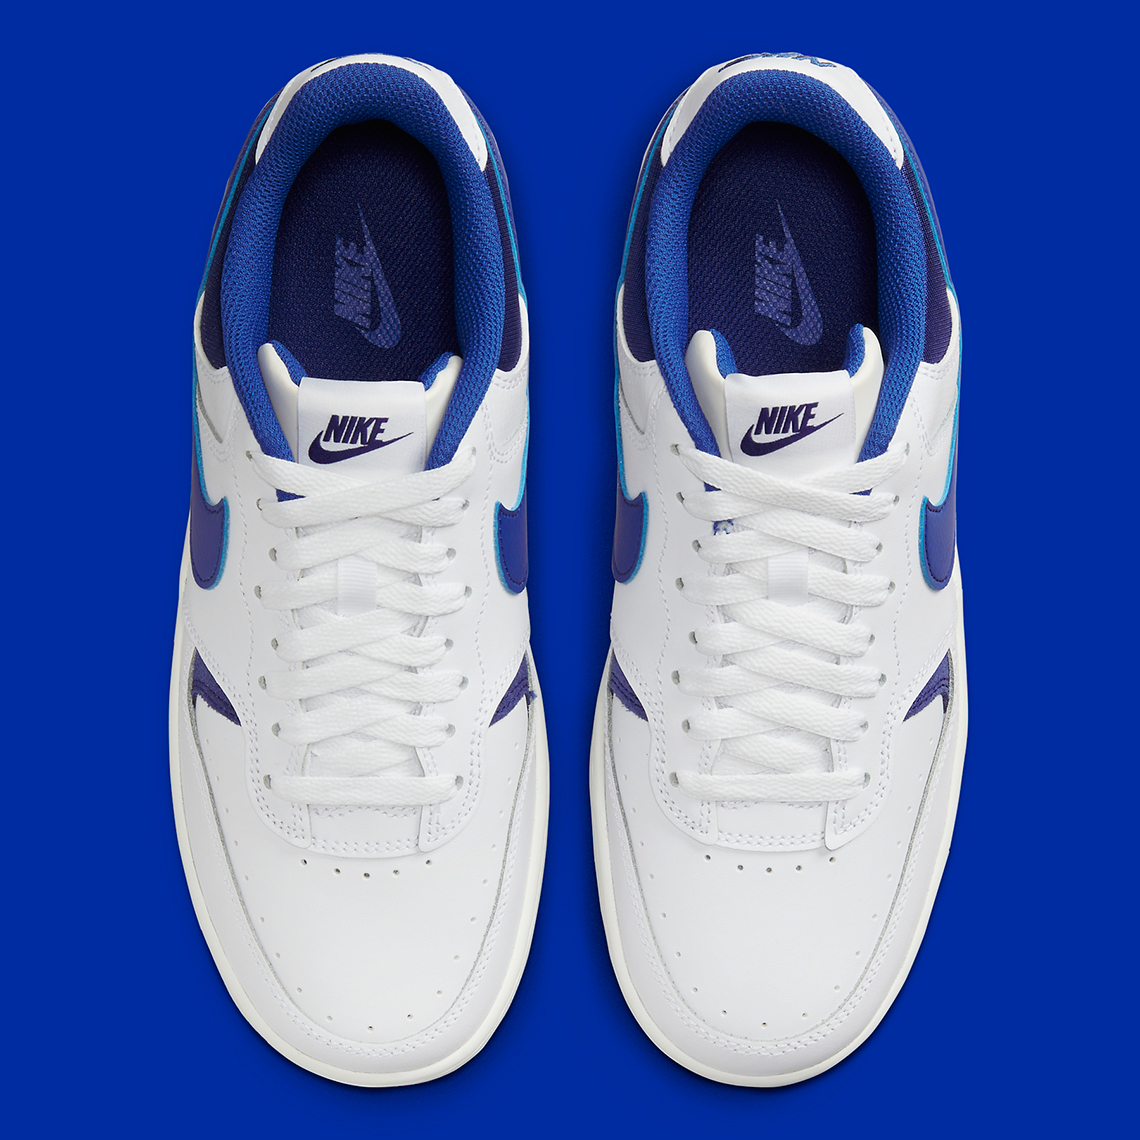 Nike Gamma Force trainers in white and game royal blue